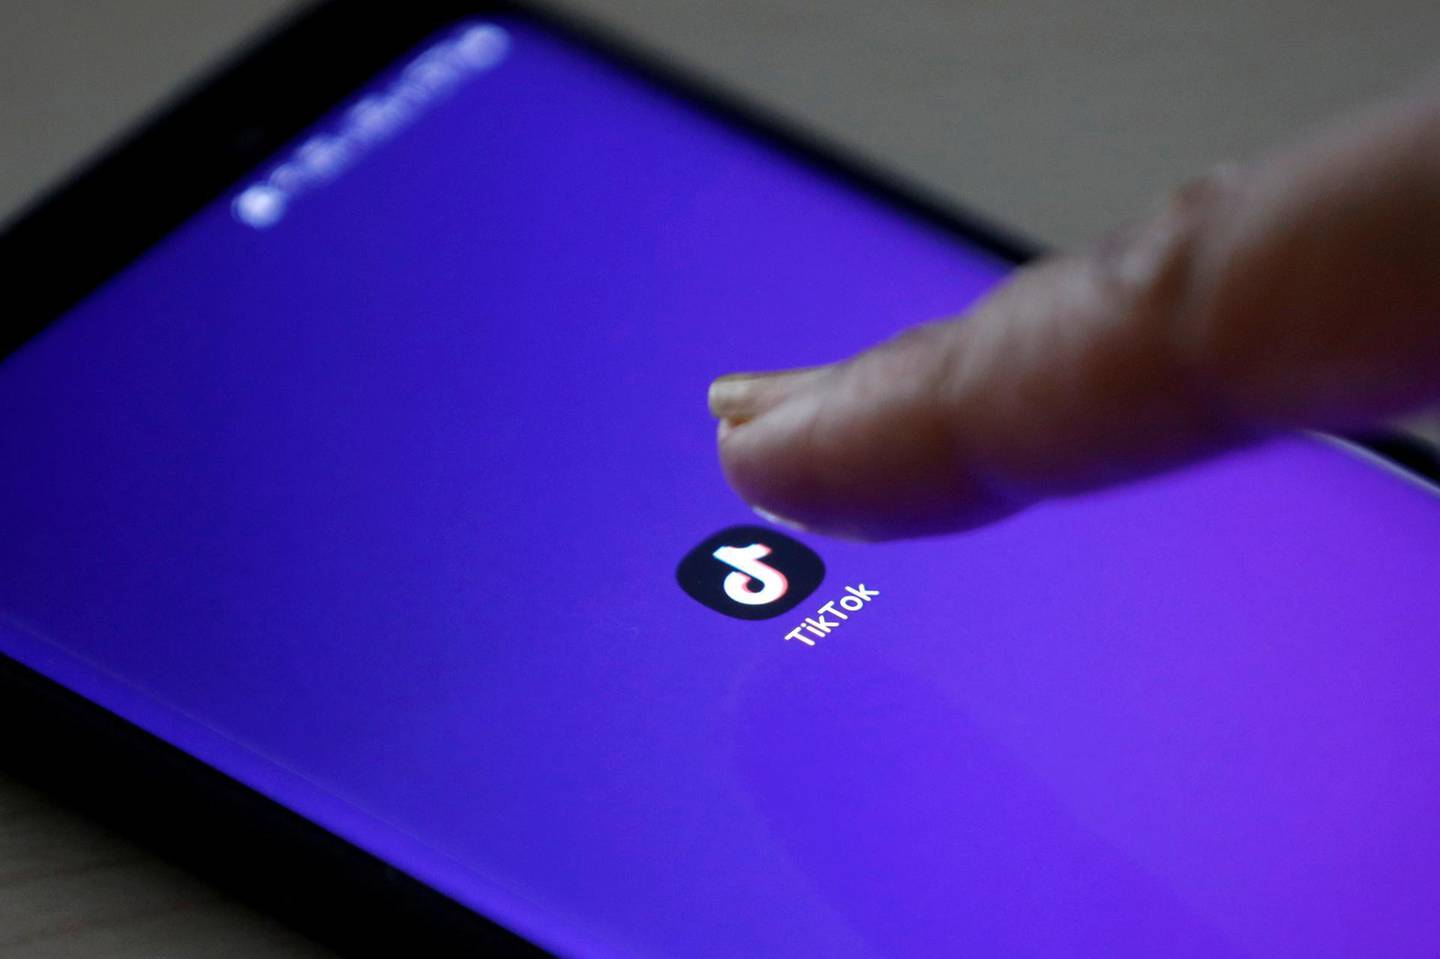 FILE PHOTO: The logo of the TikTok app is seen on a mobile phone screen in this picture illustration taken February 21, 2019. Picture taken February 21, 2019. REUTERS/Danish Siddiqui/Illustration/File Photo